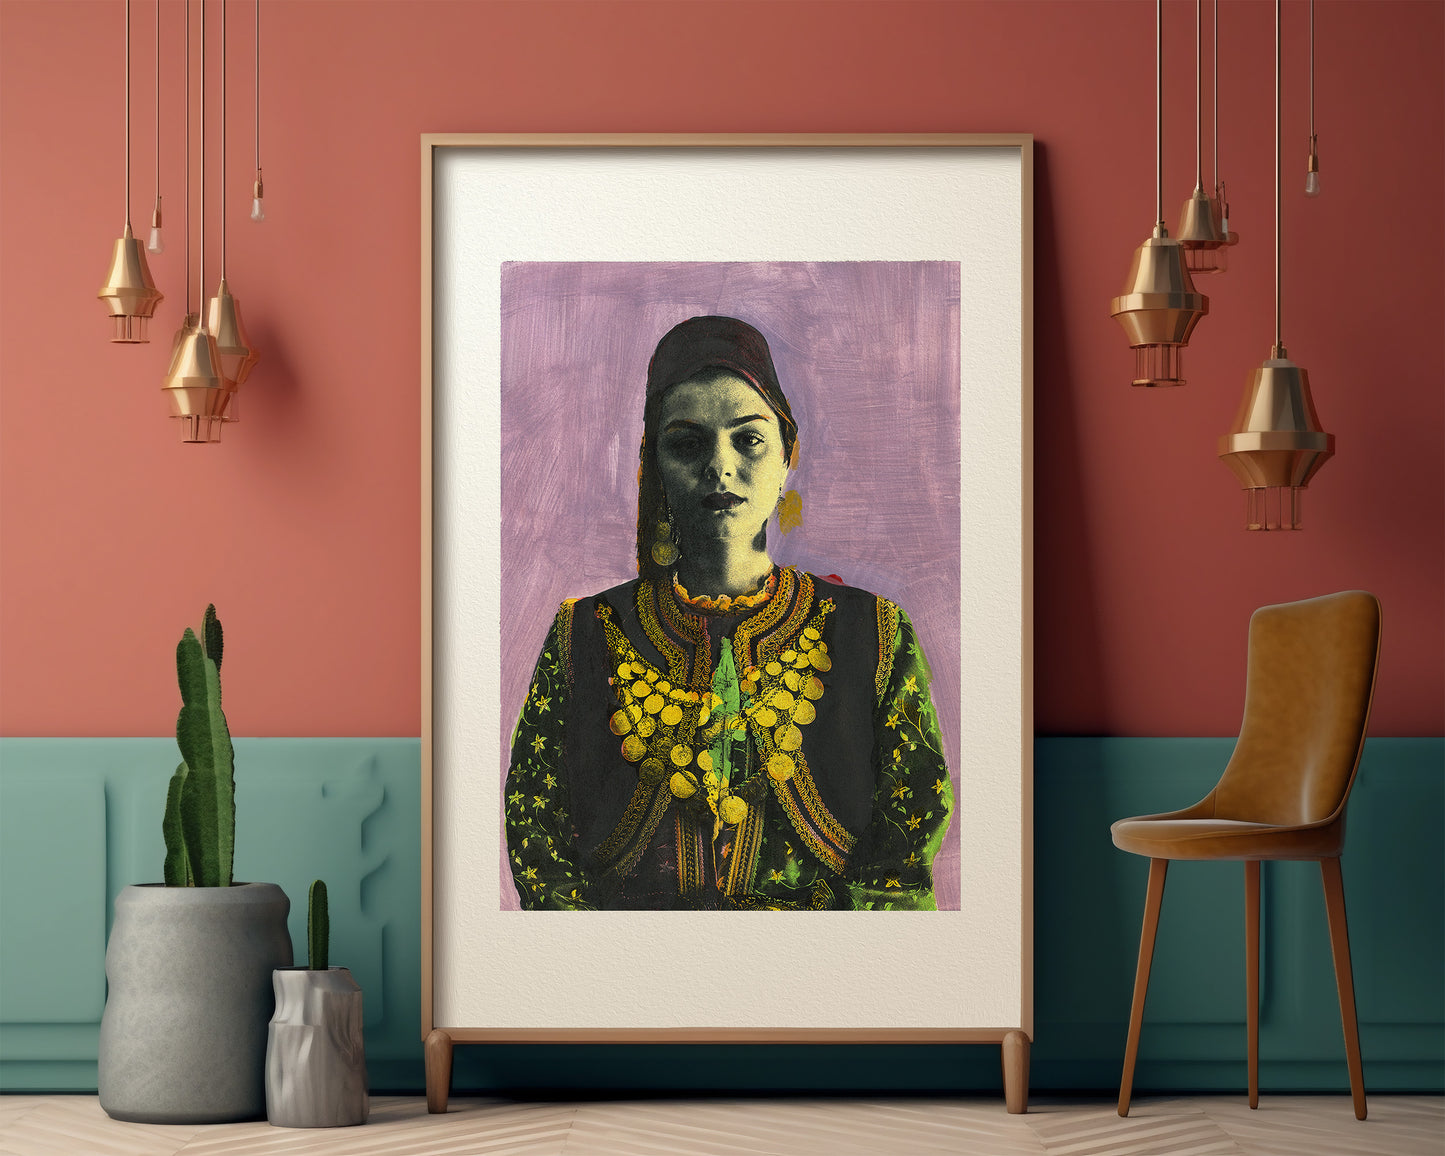 Painting Pop Art Wall Art from Greece | Mauve Kastoria Urban Costume from Macedonia, by George Tatakis - inside an eclectic room